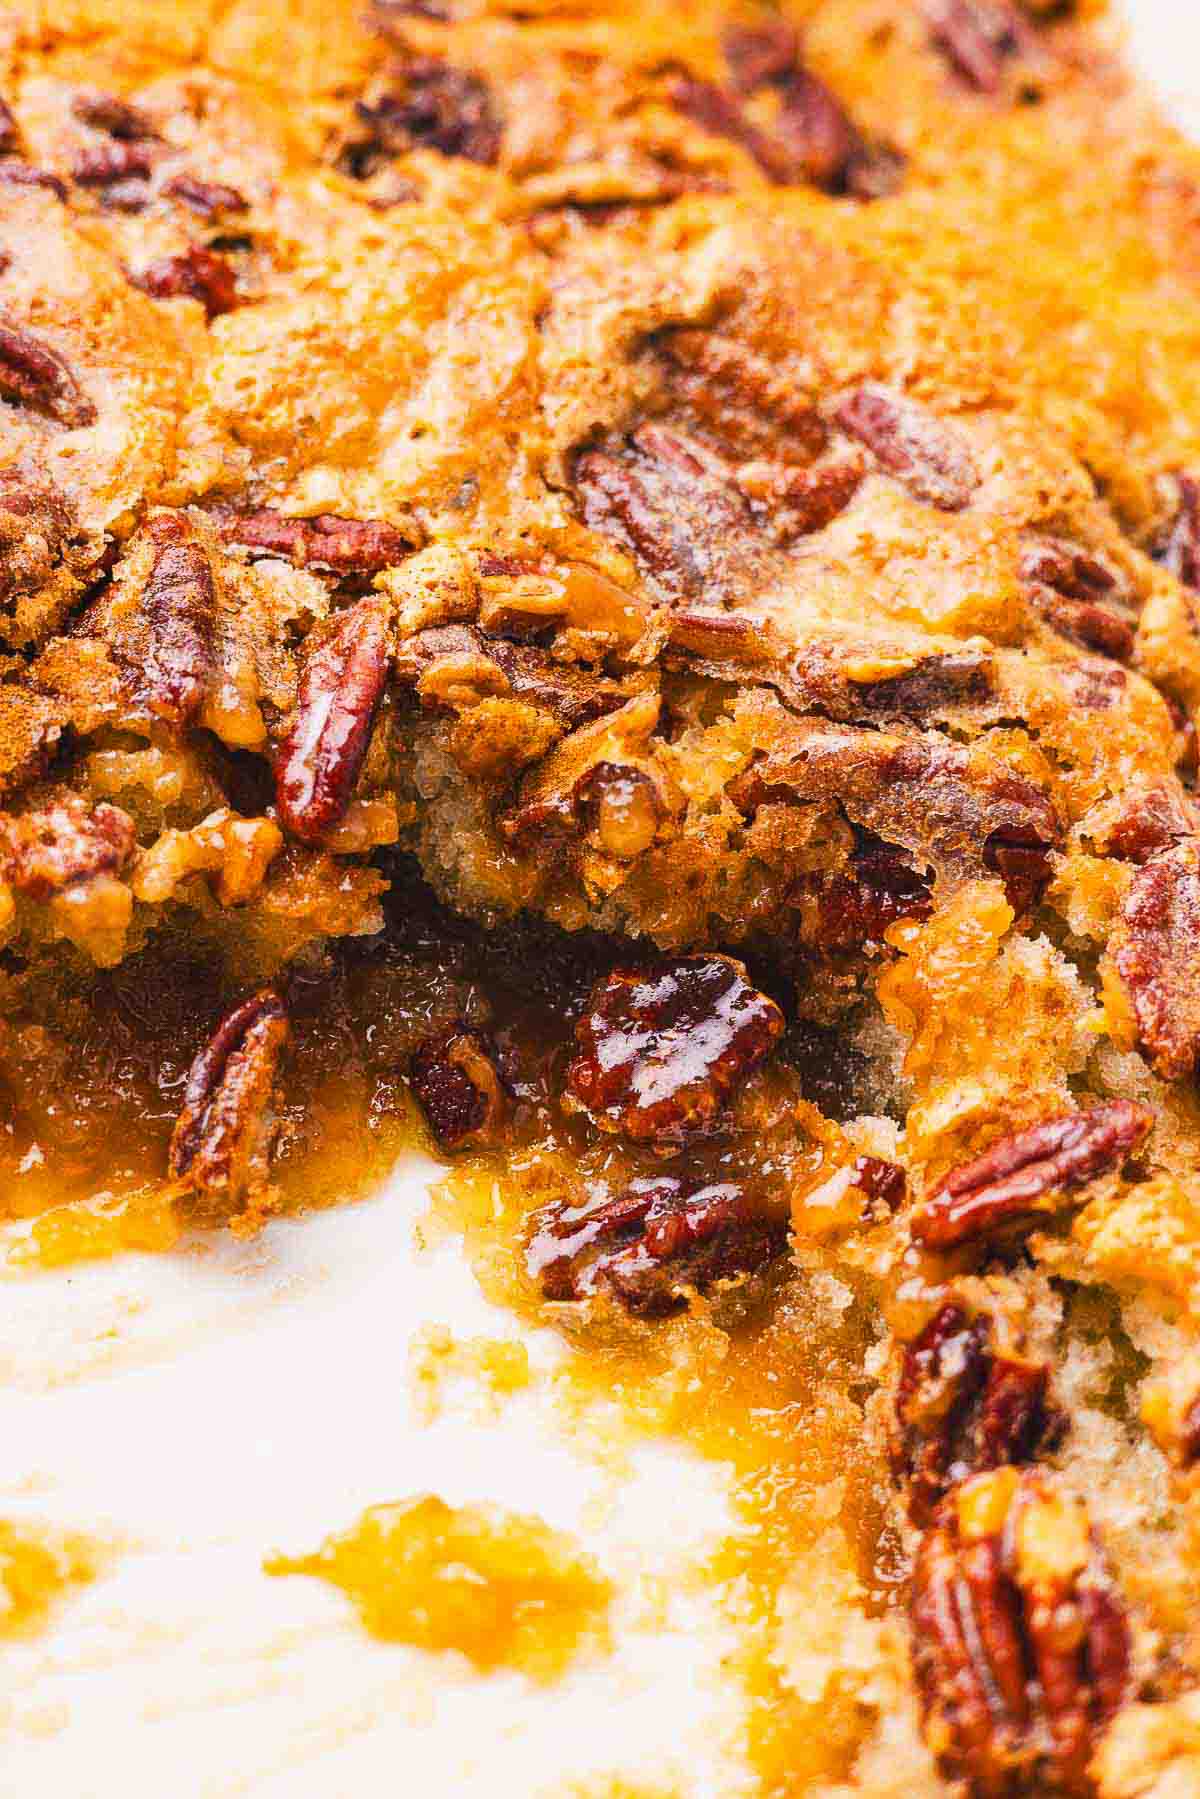 Pecan cobbler in a baking dish with a scoop taken out.